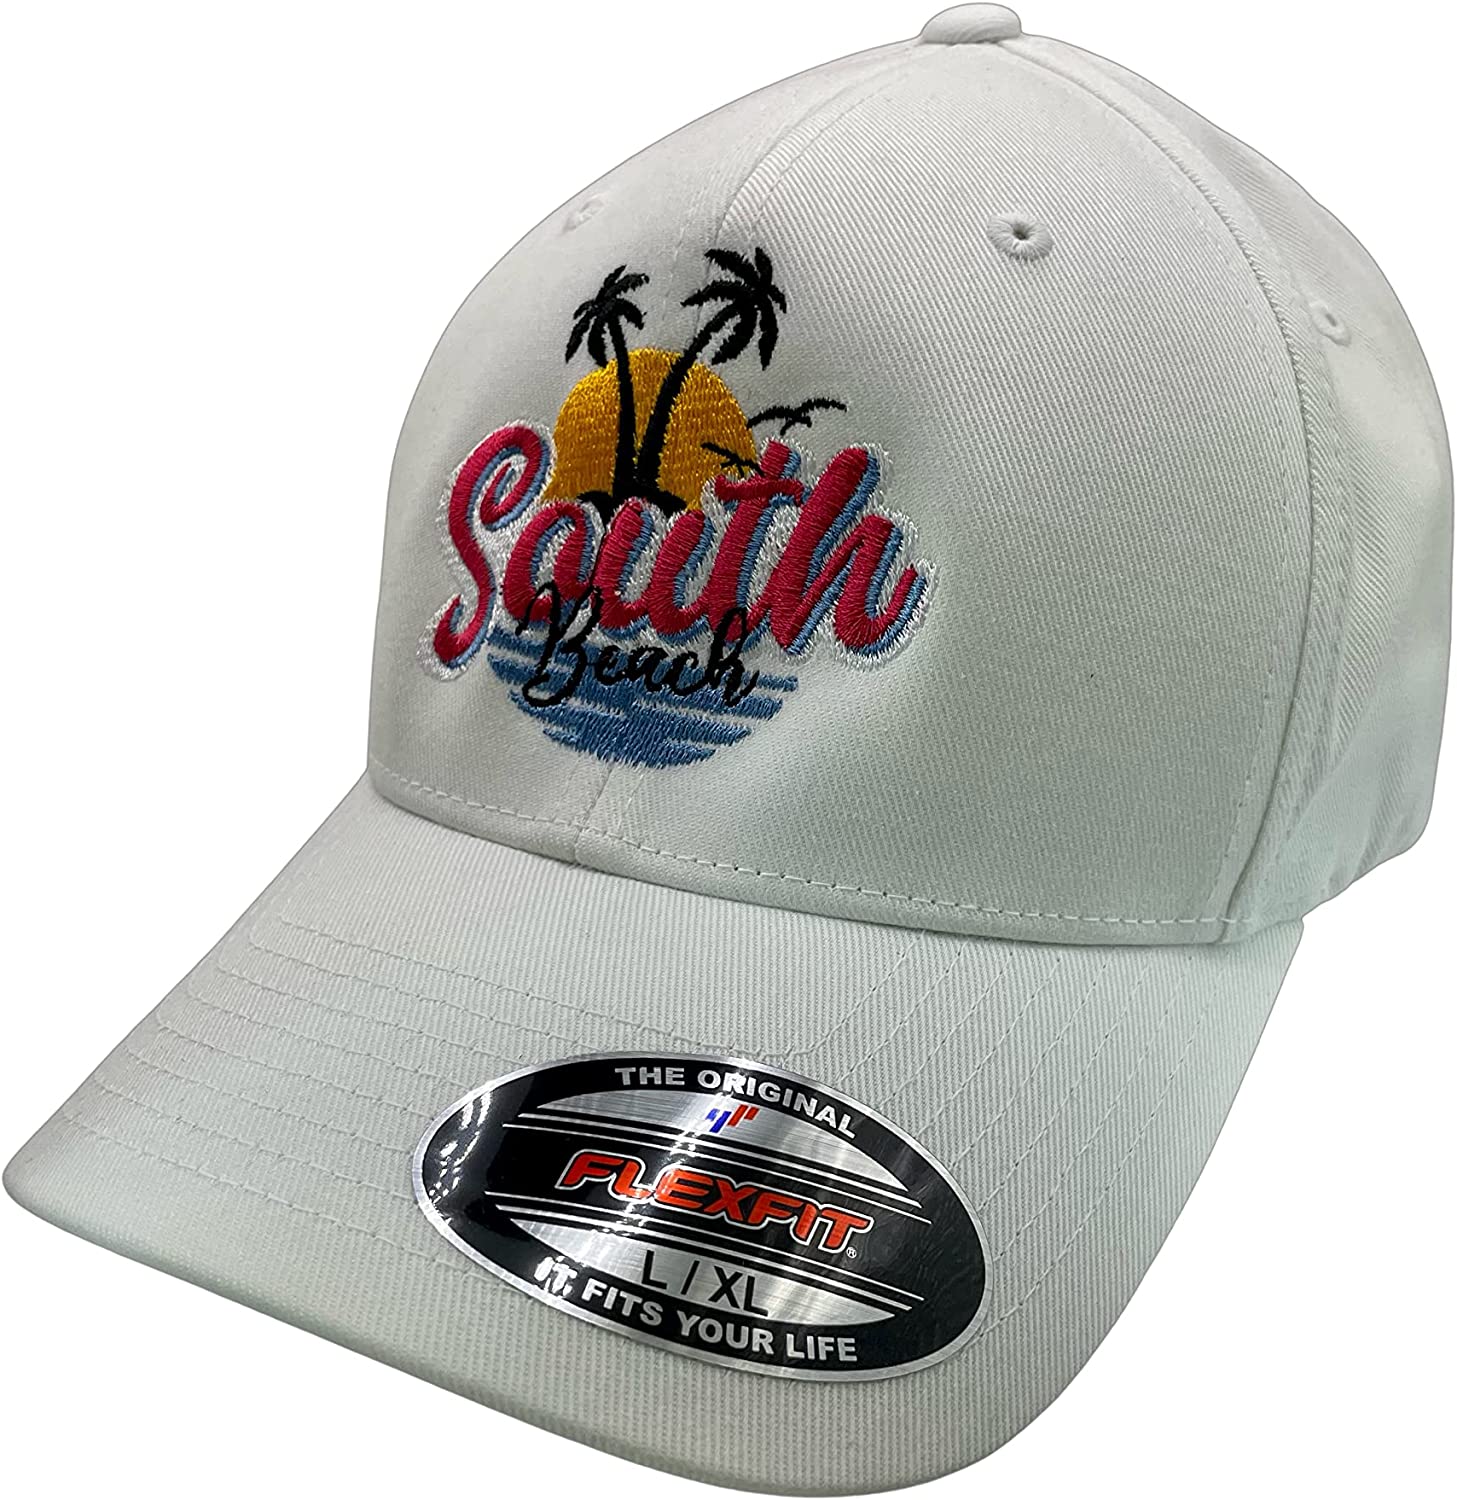 South Beach Hat – Flex Fit, Fitted Hat, with Block Lettering by Pats Hats White